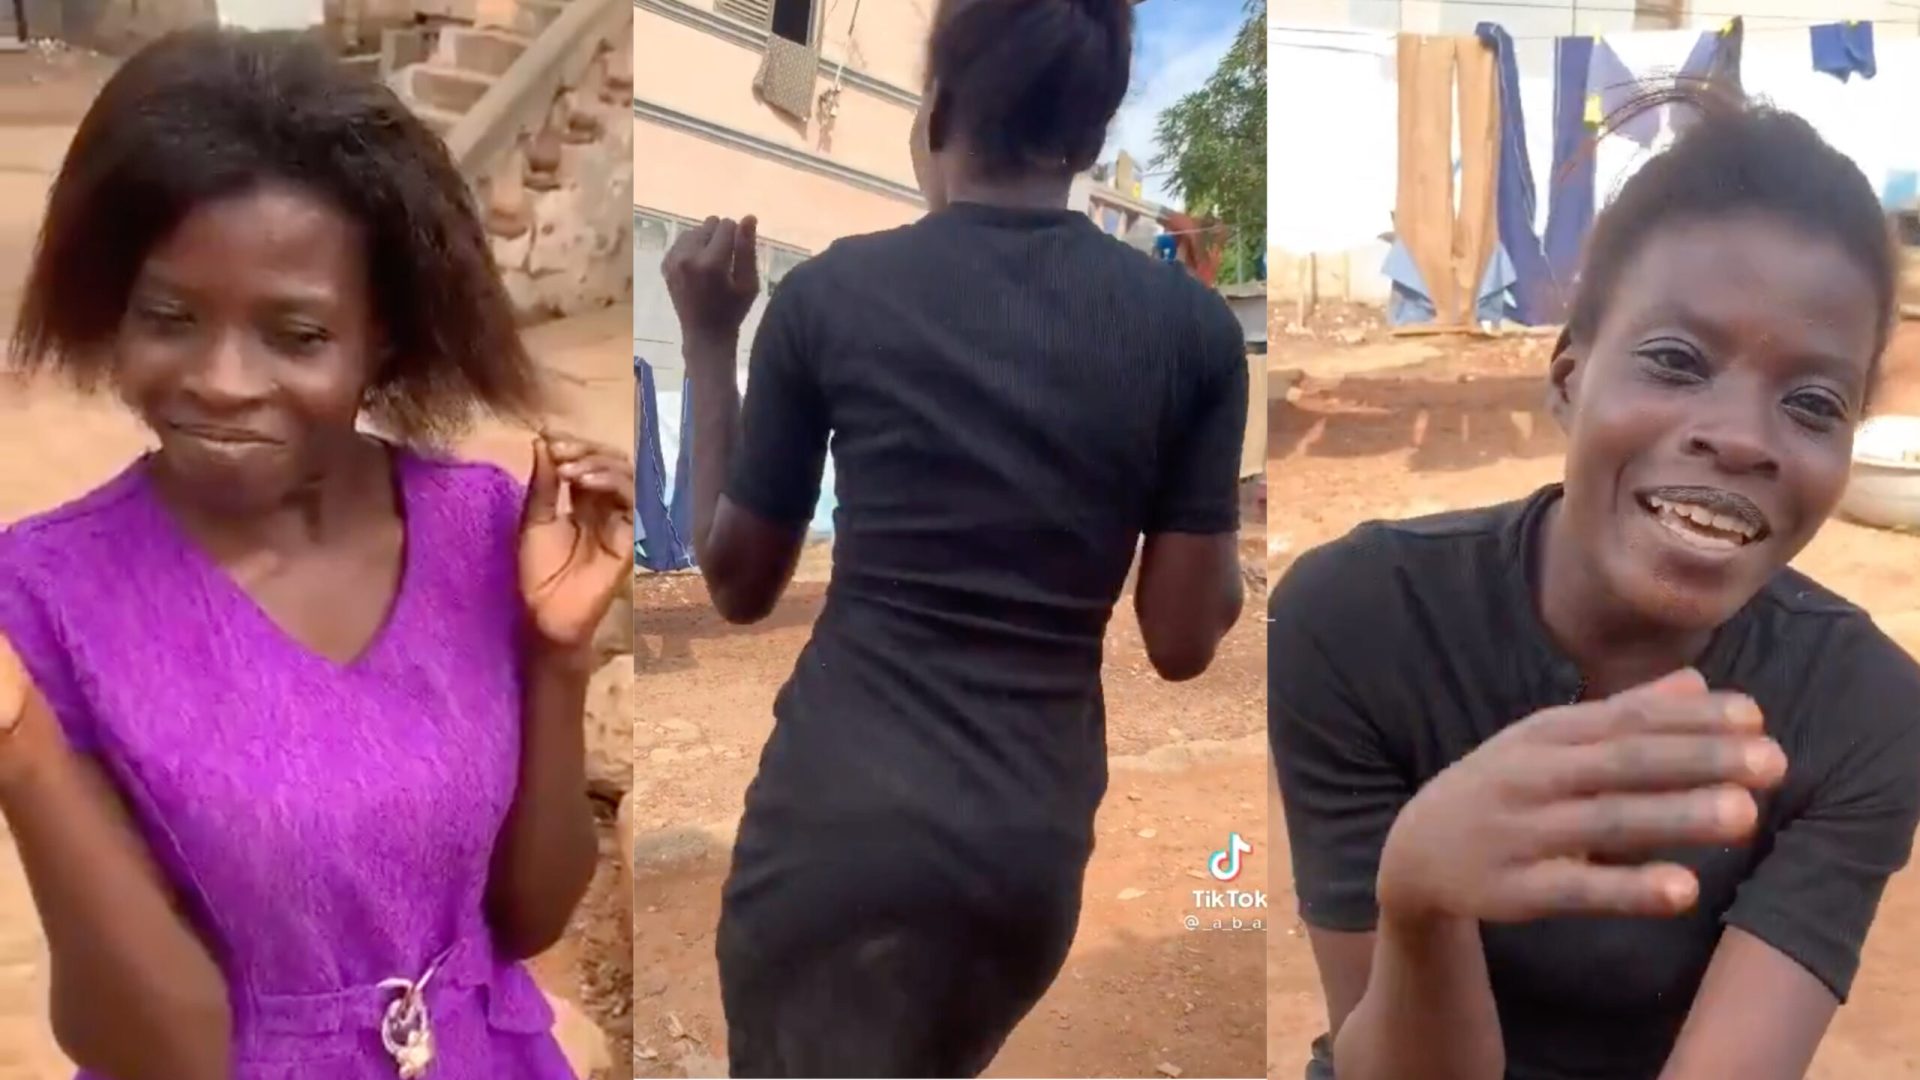 'I'm sweet, beautiful and se.xy, I need a boyfriend" – Unassuming lady woos men, flaunts her flat backside in video